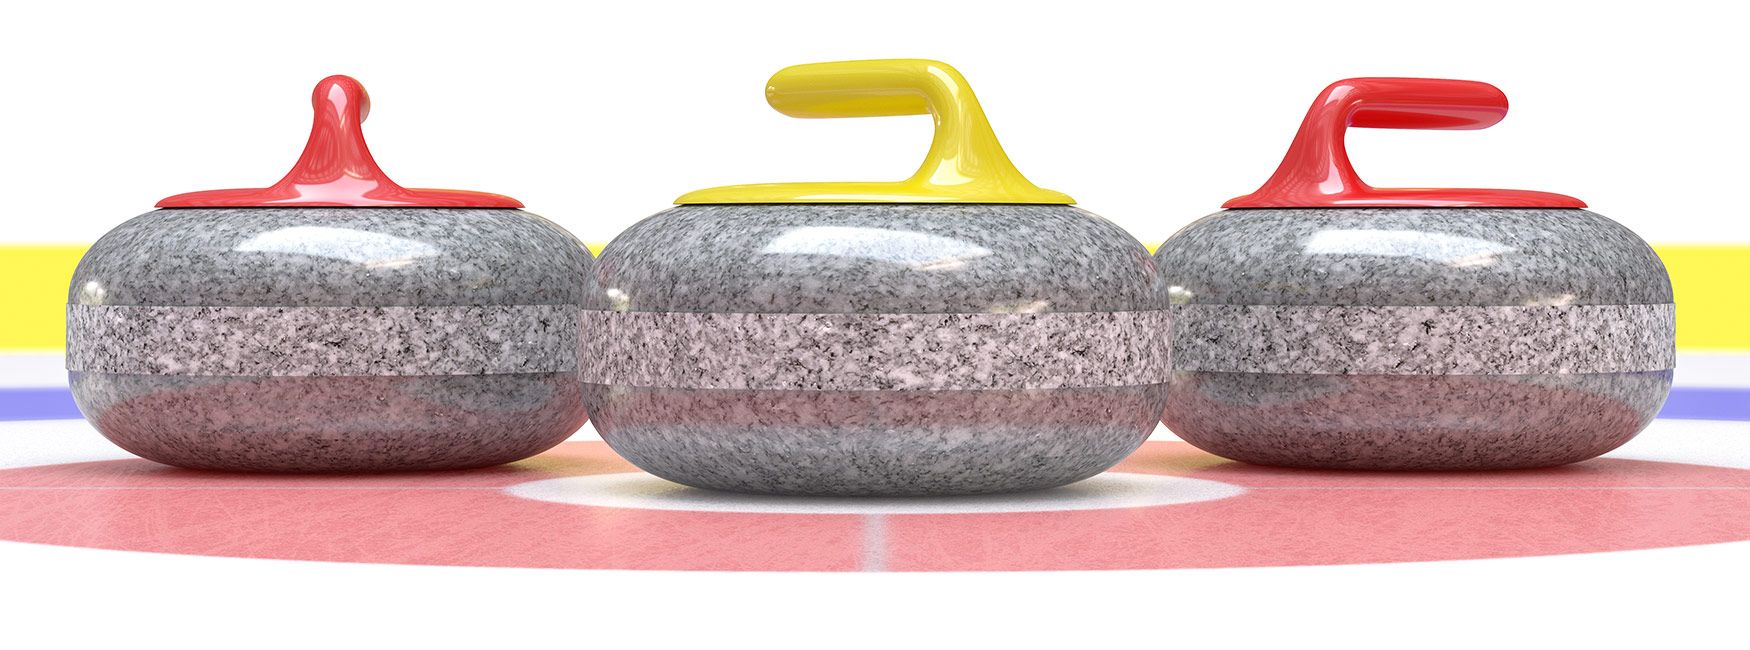 3 Curling stones on the ice